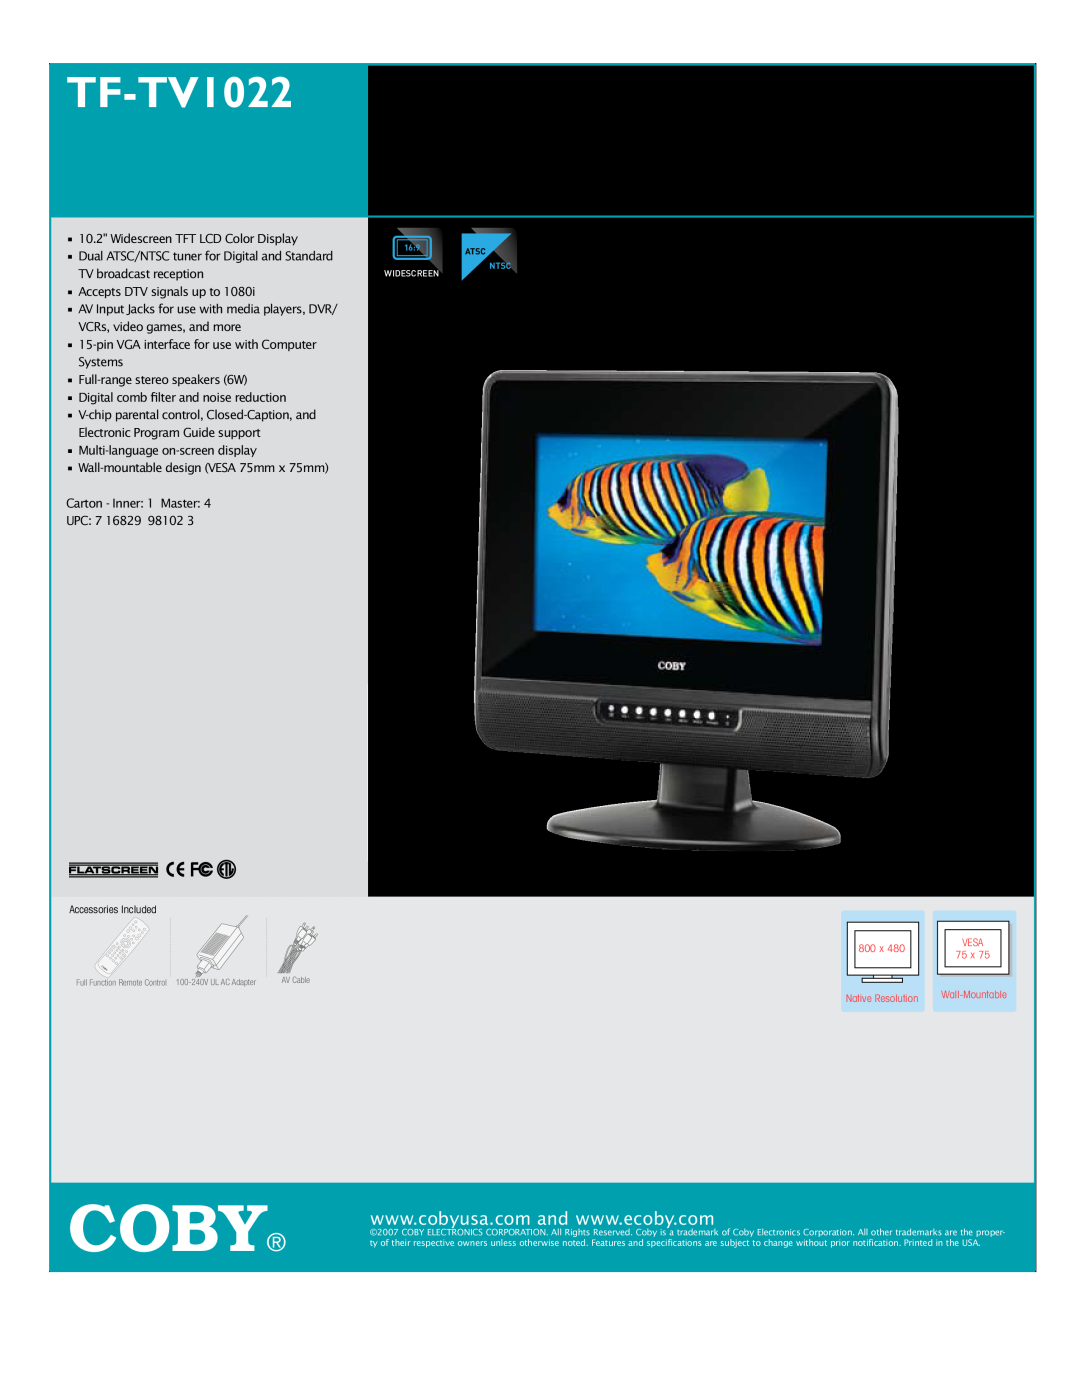 COBY electronic specifications Coby, TF-TV1022 10.2” WIDESCREEN LCD DIGTAL TV/MONITOR 